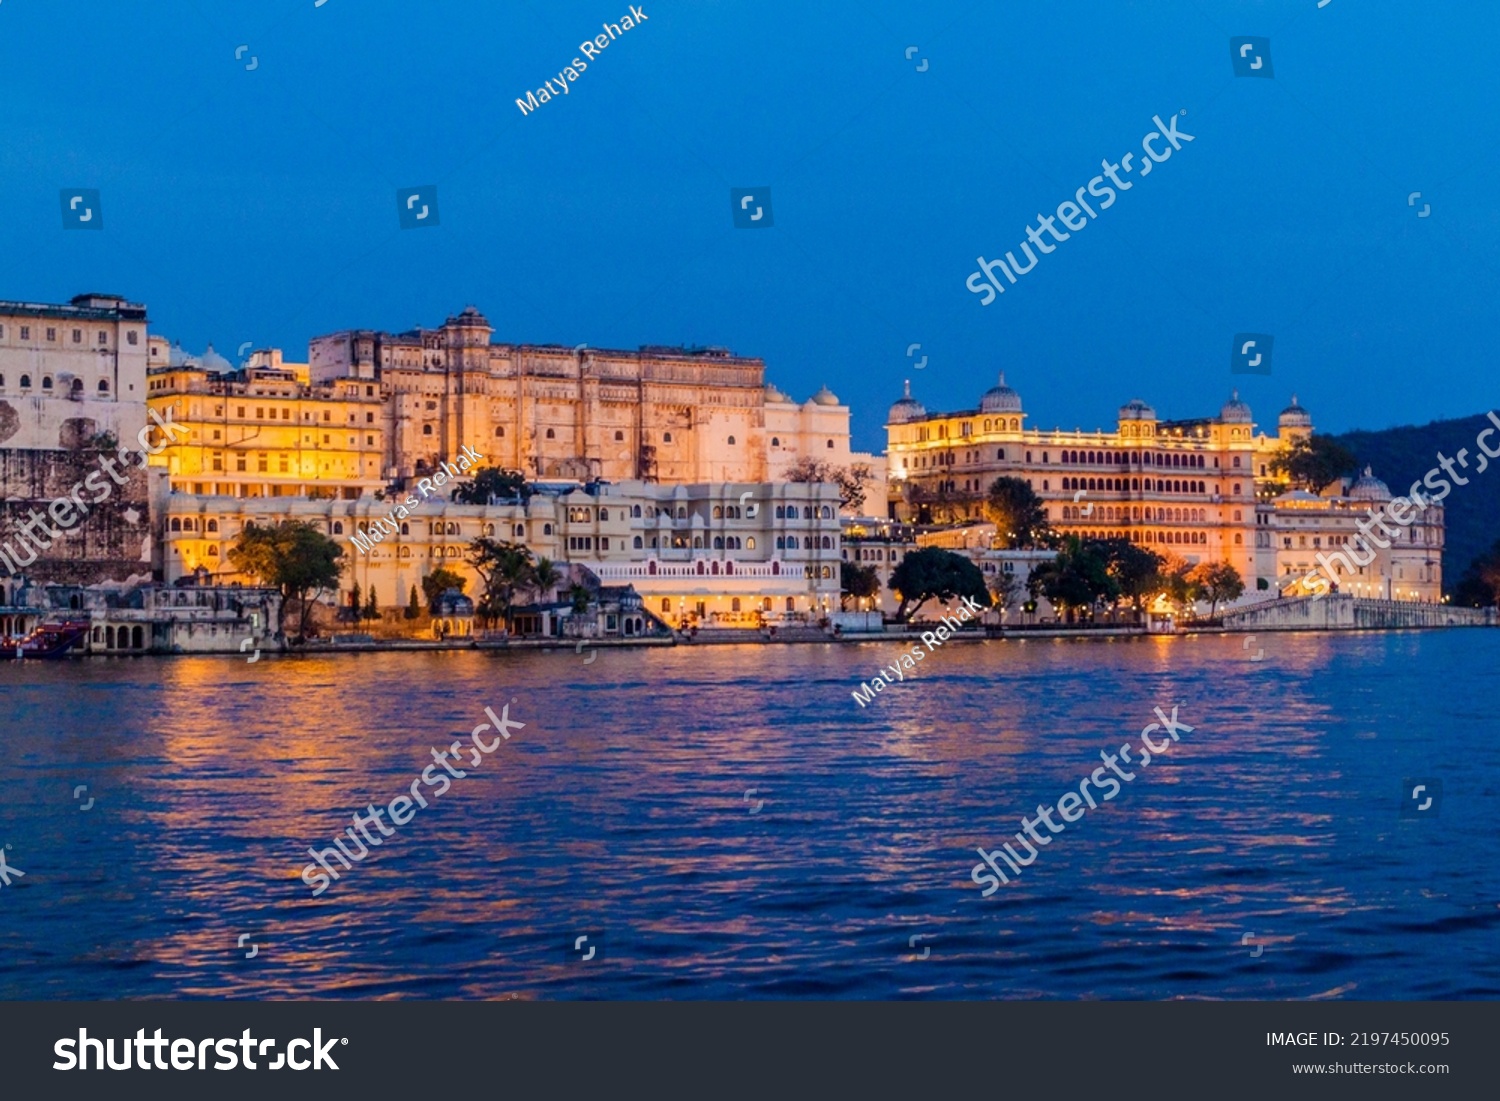 Eveing view of City palace in Udaipur, Rajasthan state, India #2197450095